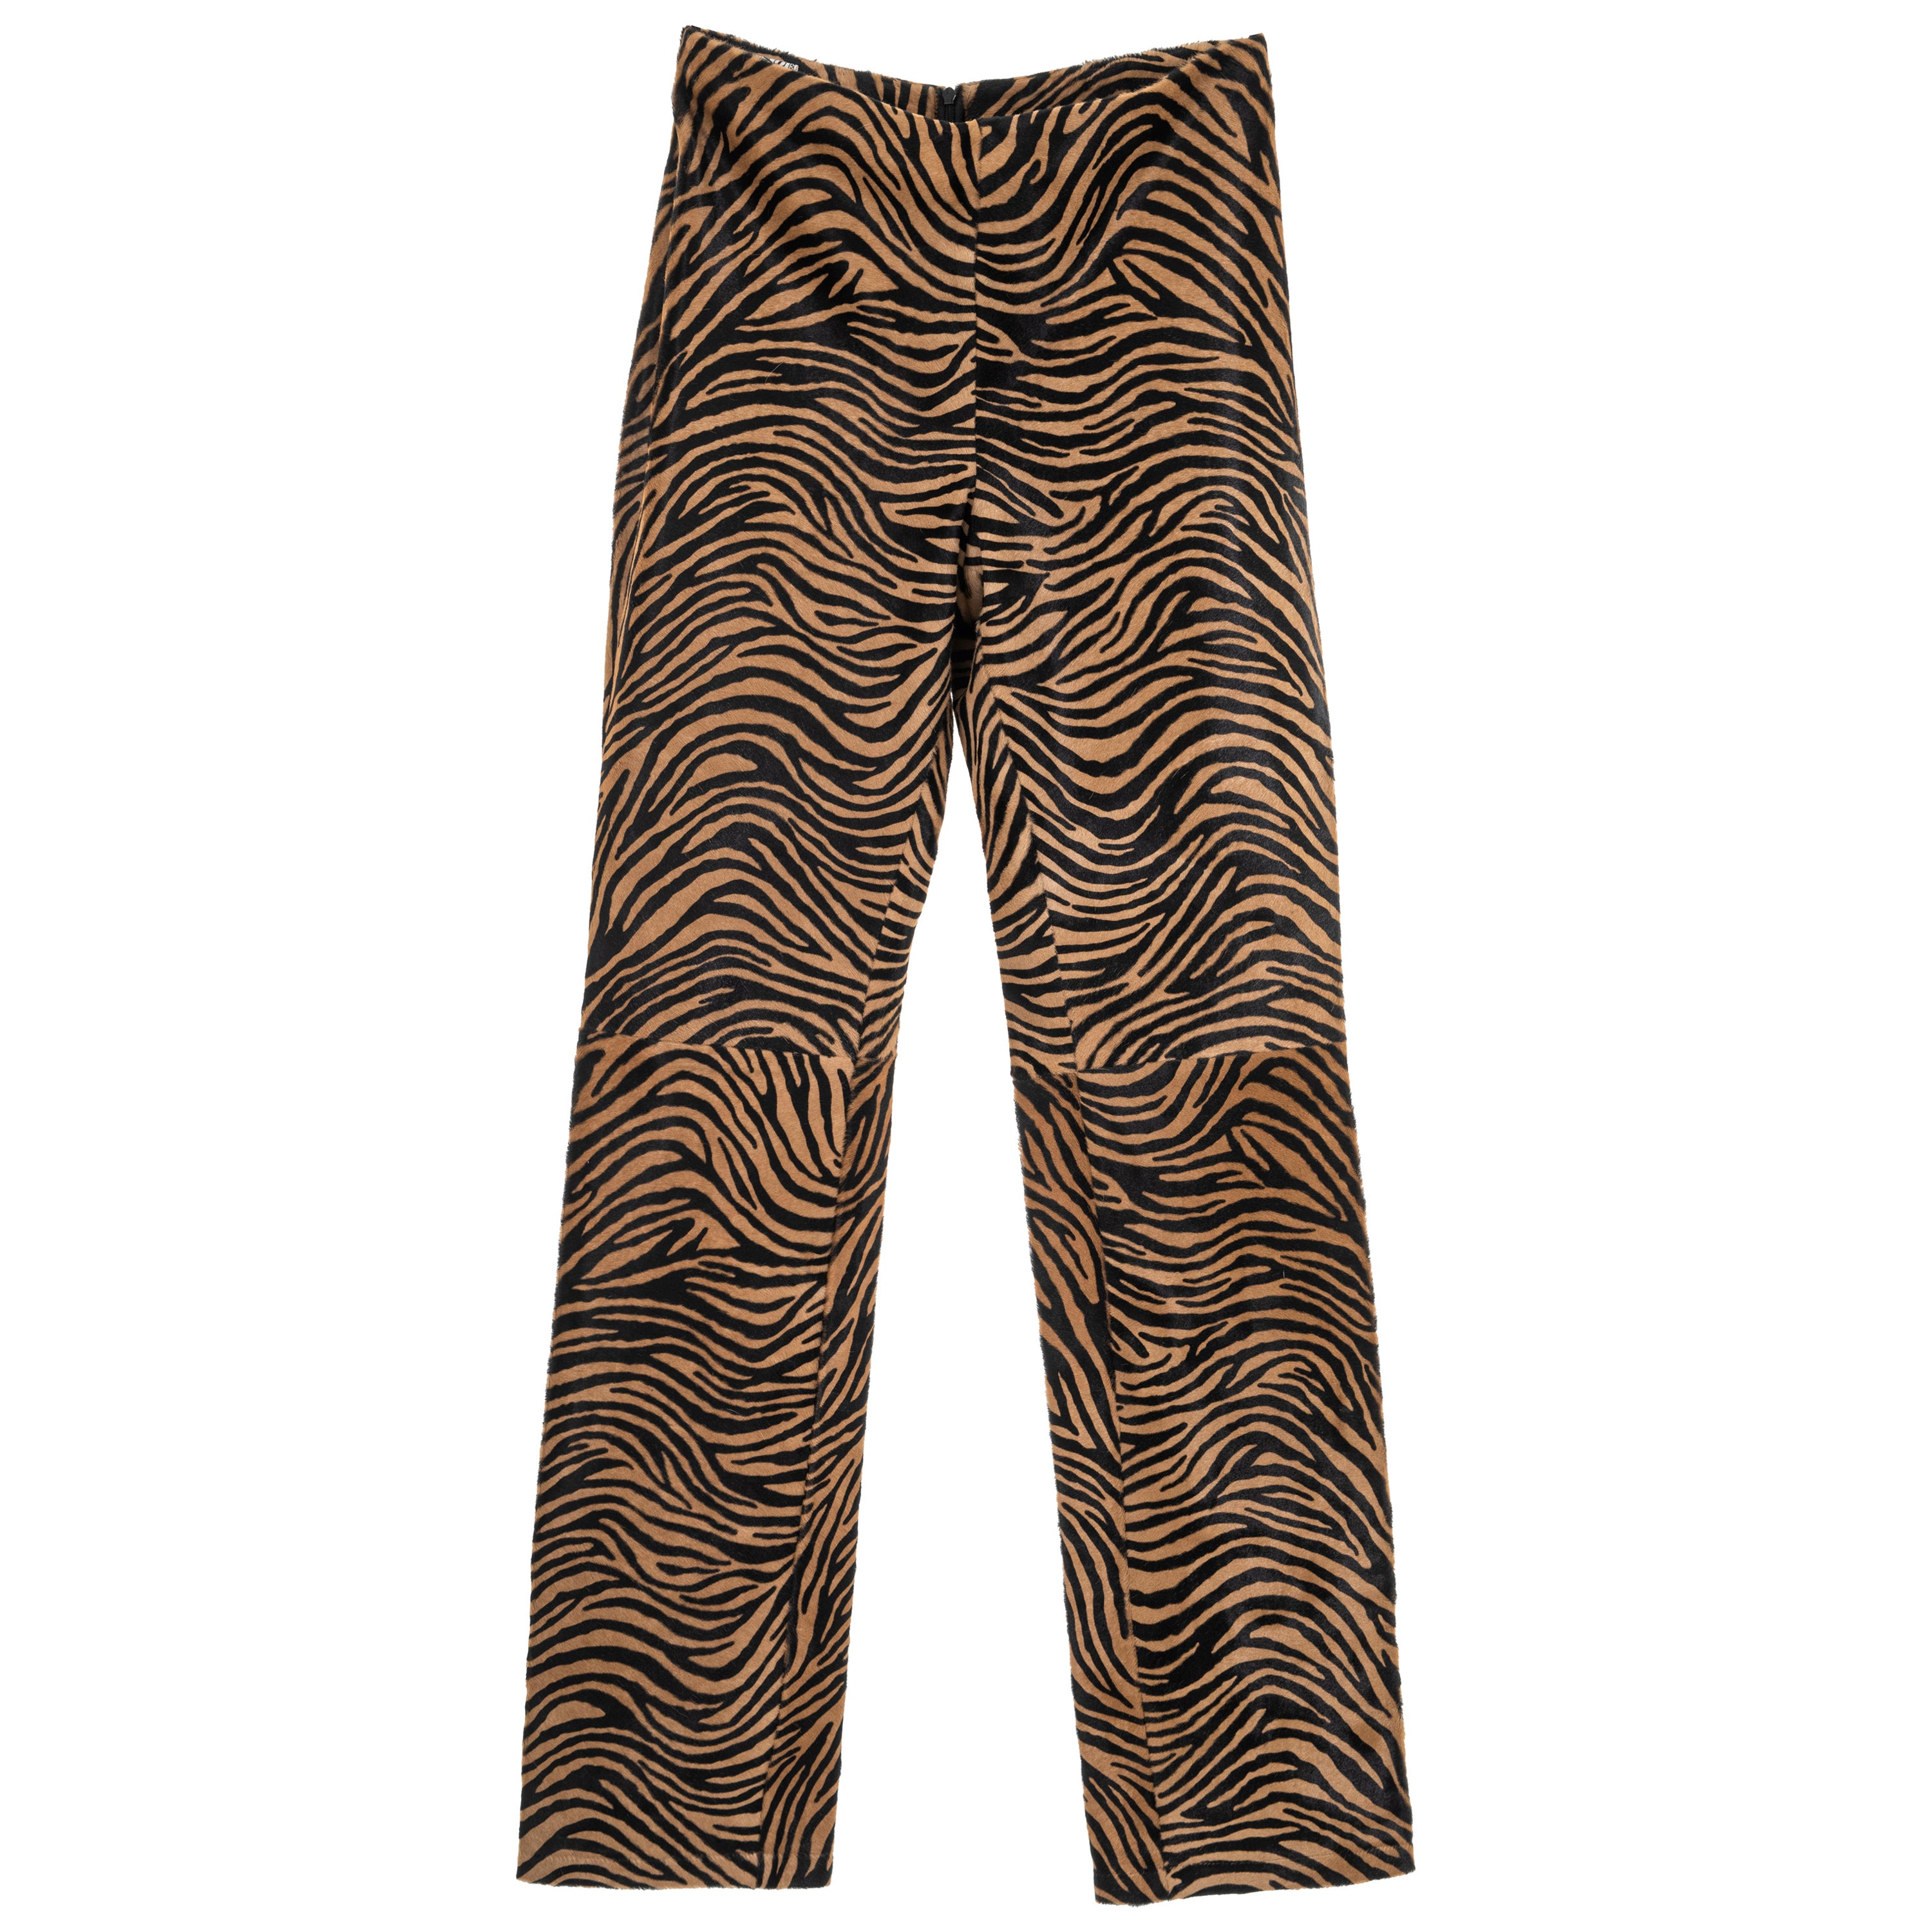 Gianni Versace tiger-print pony hair leather pants, fw 1999 For Sale